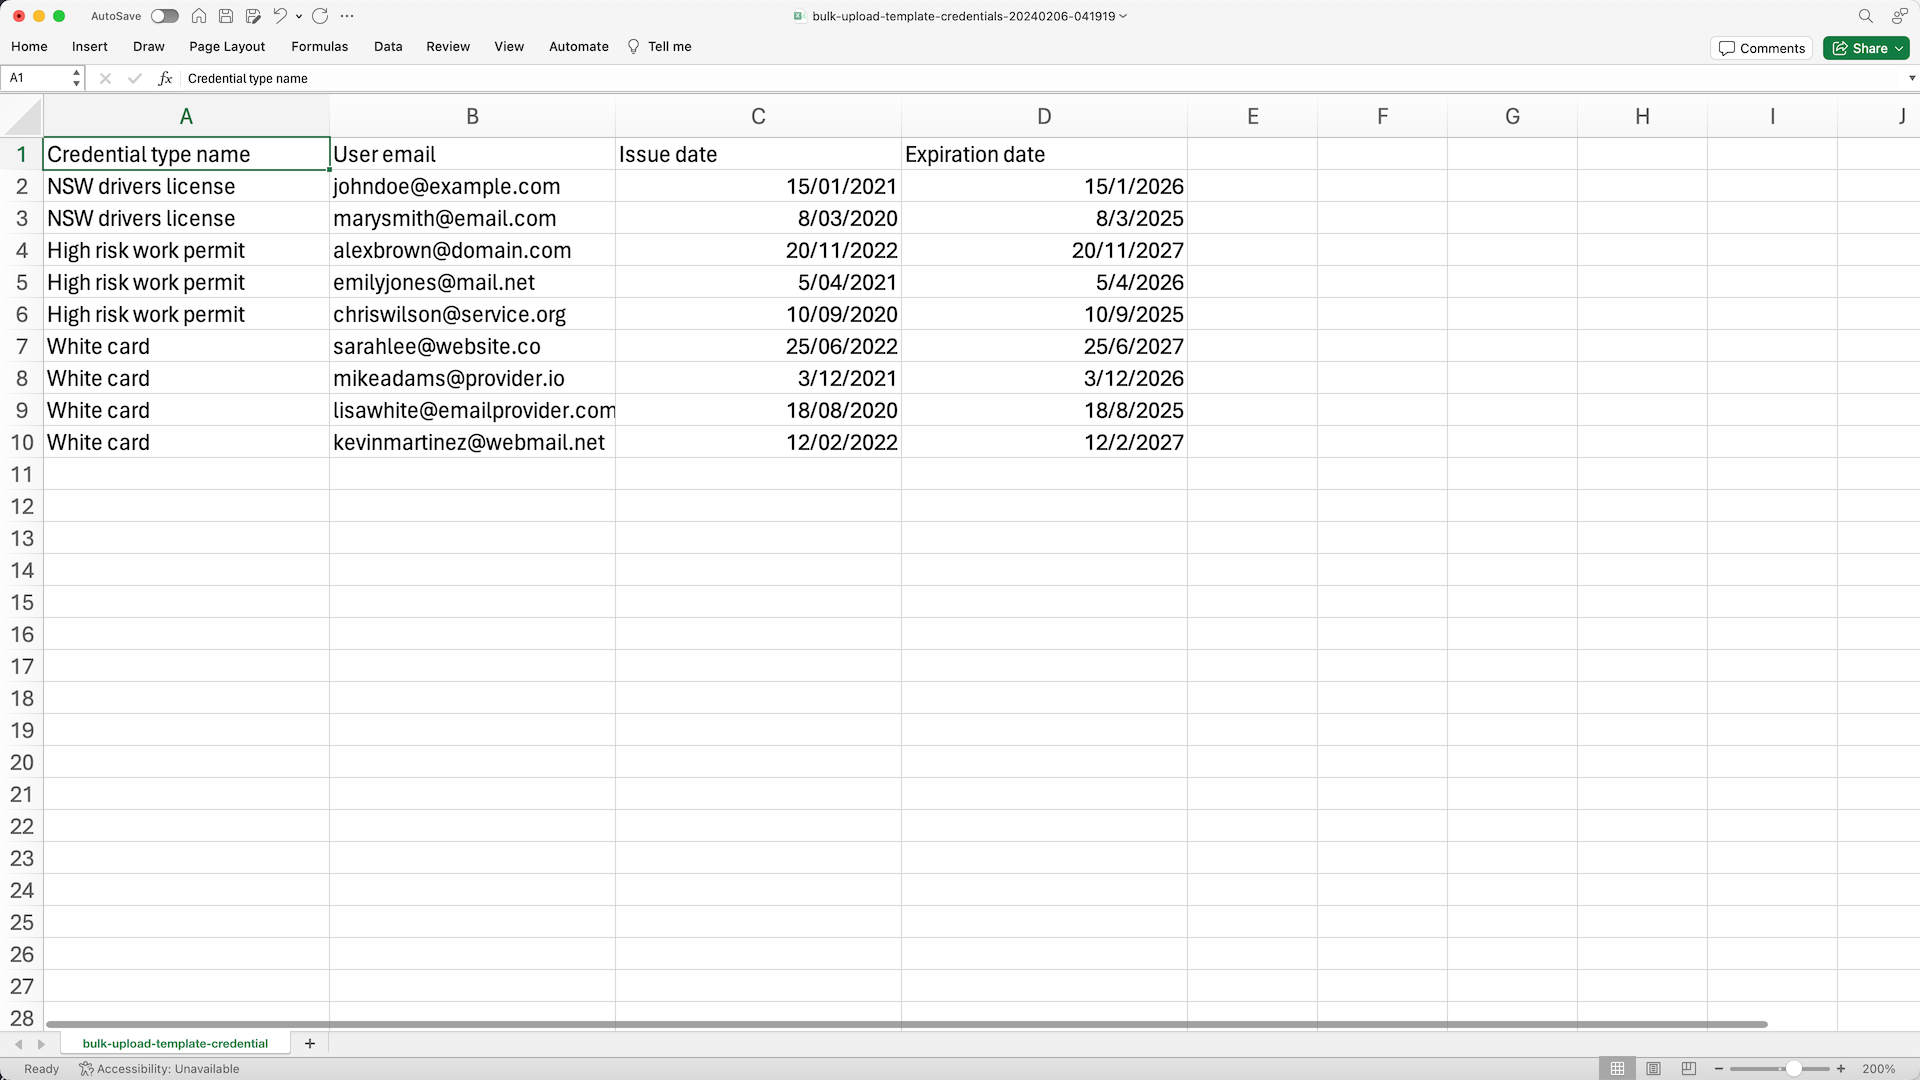 An example of a CSV prepared for bulk adding credentials.